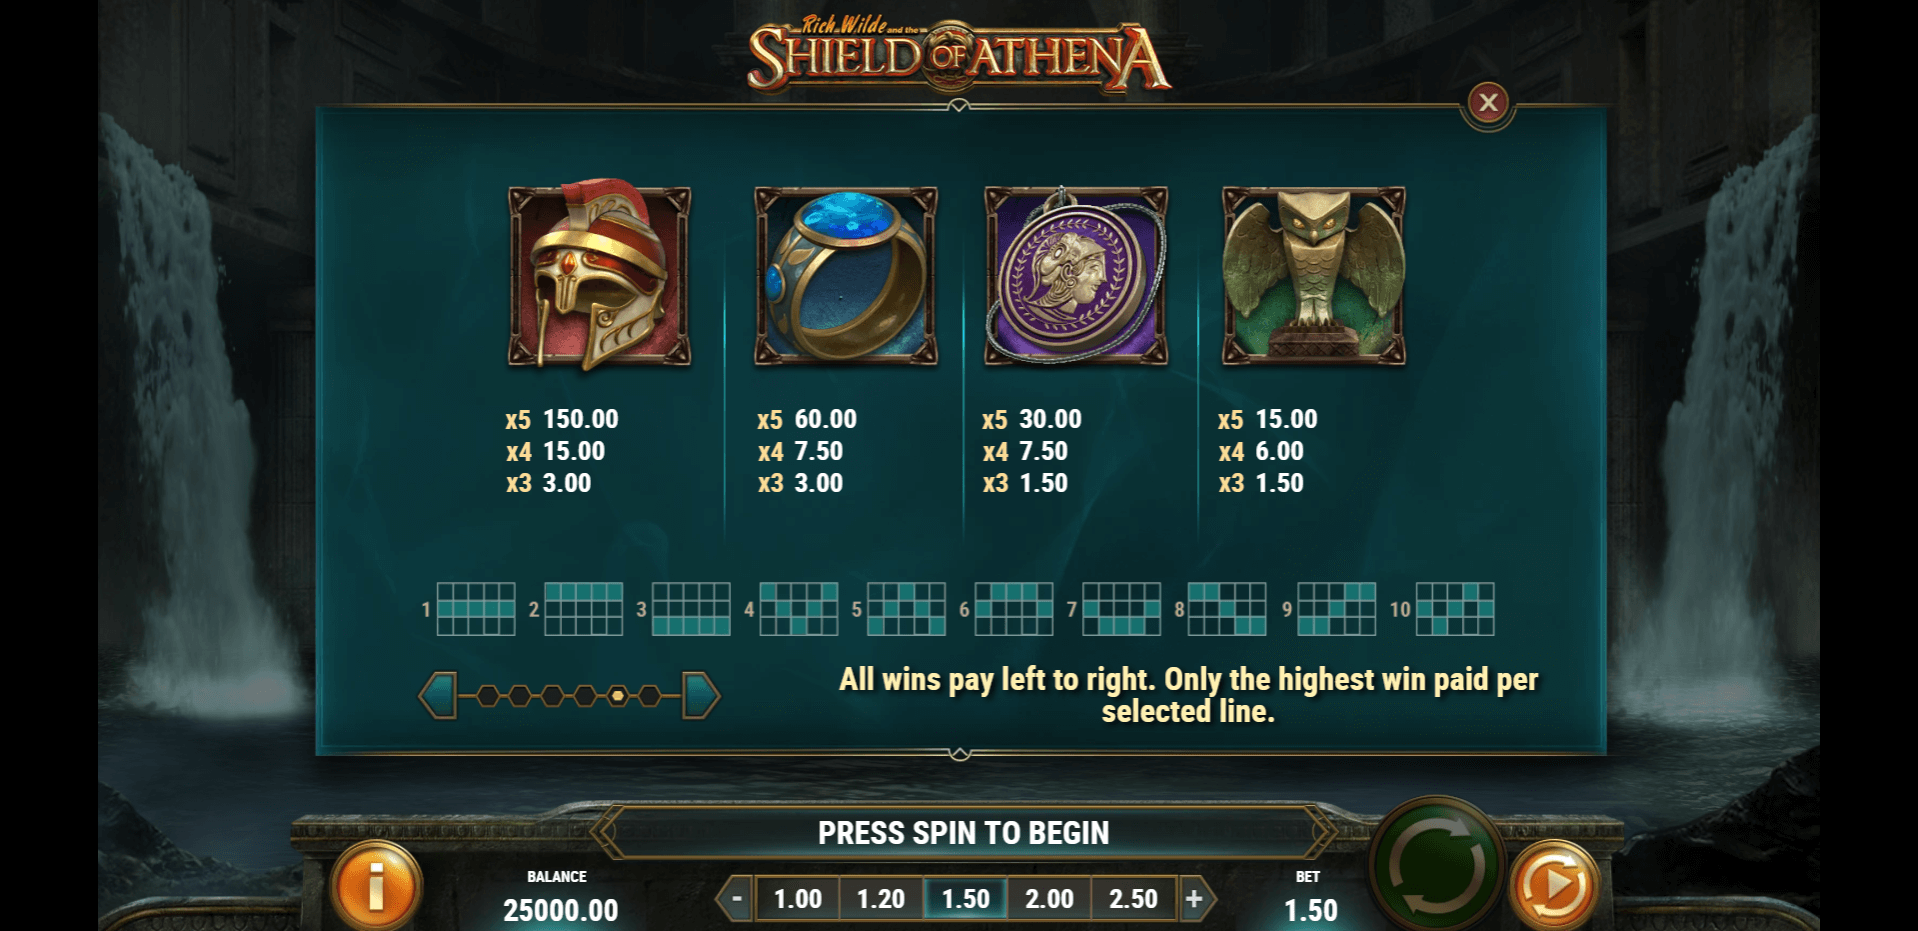 rich wilde and the shield of athena slot machine detail image 4